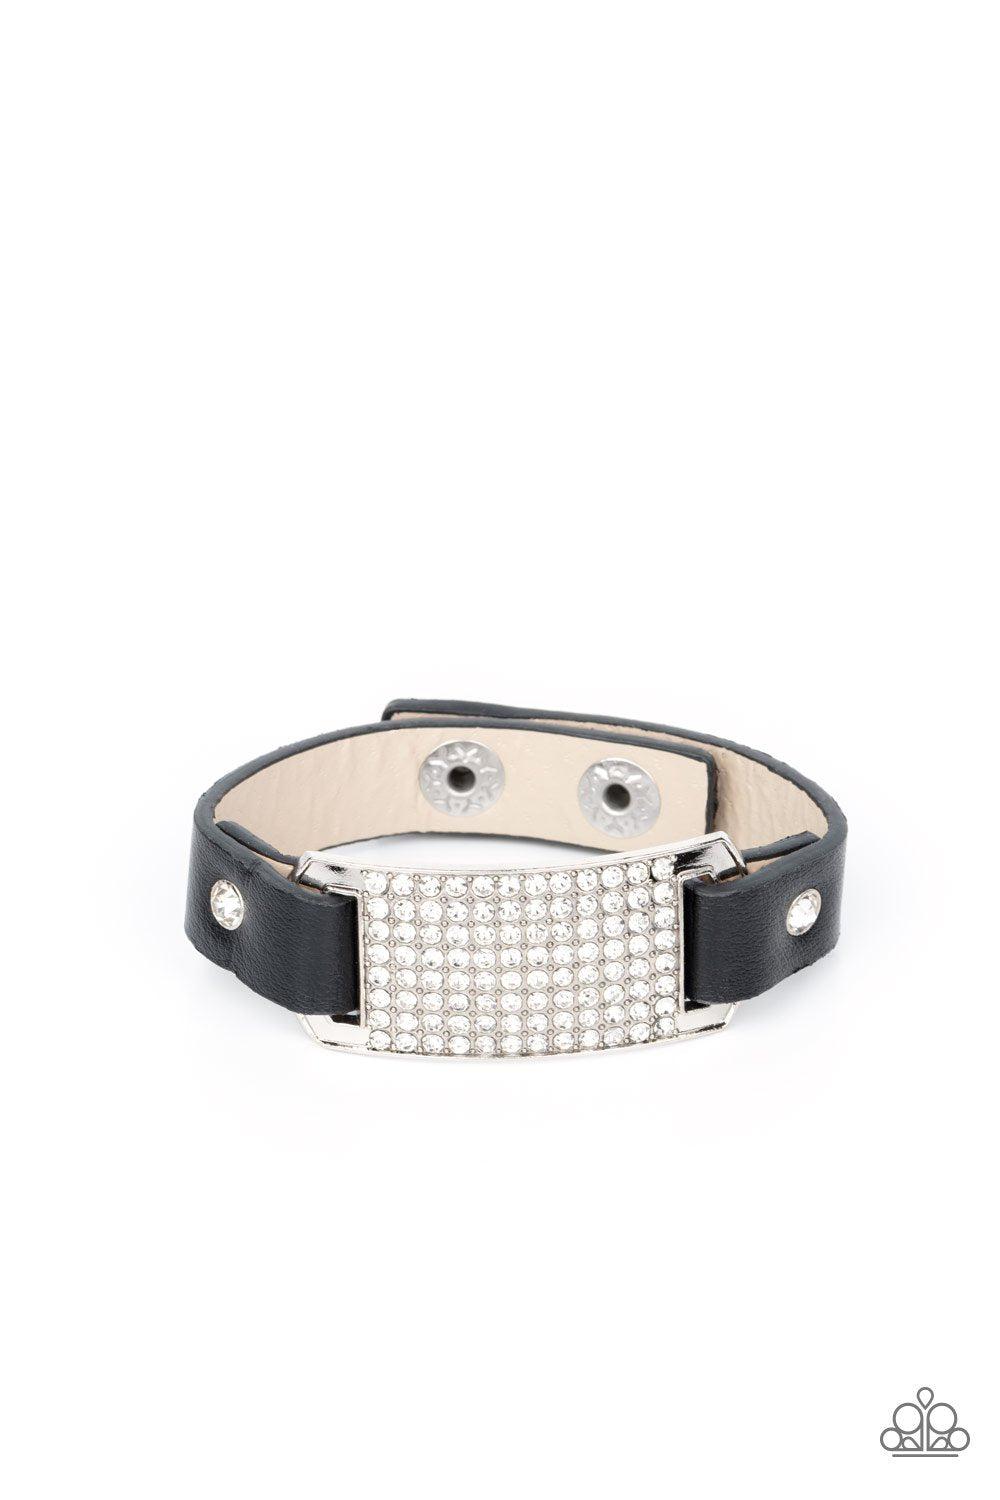 Urban Rivalry Black Leather and White Rhinestone Wrap Snap Bracelet - Paparazzi Accessories- lightbox - CarasShop.com - $5 Jewelry by Cara Jewels